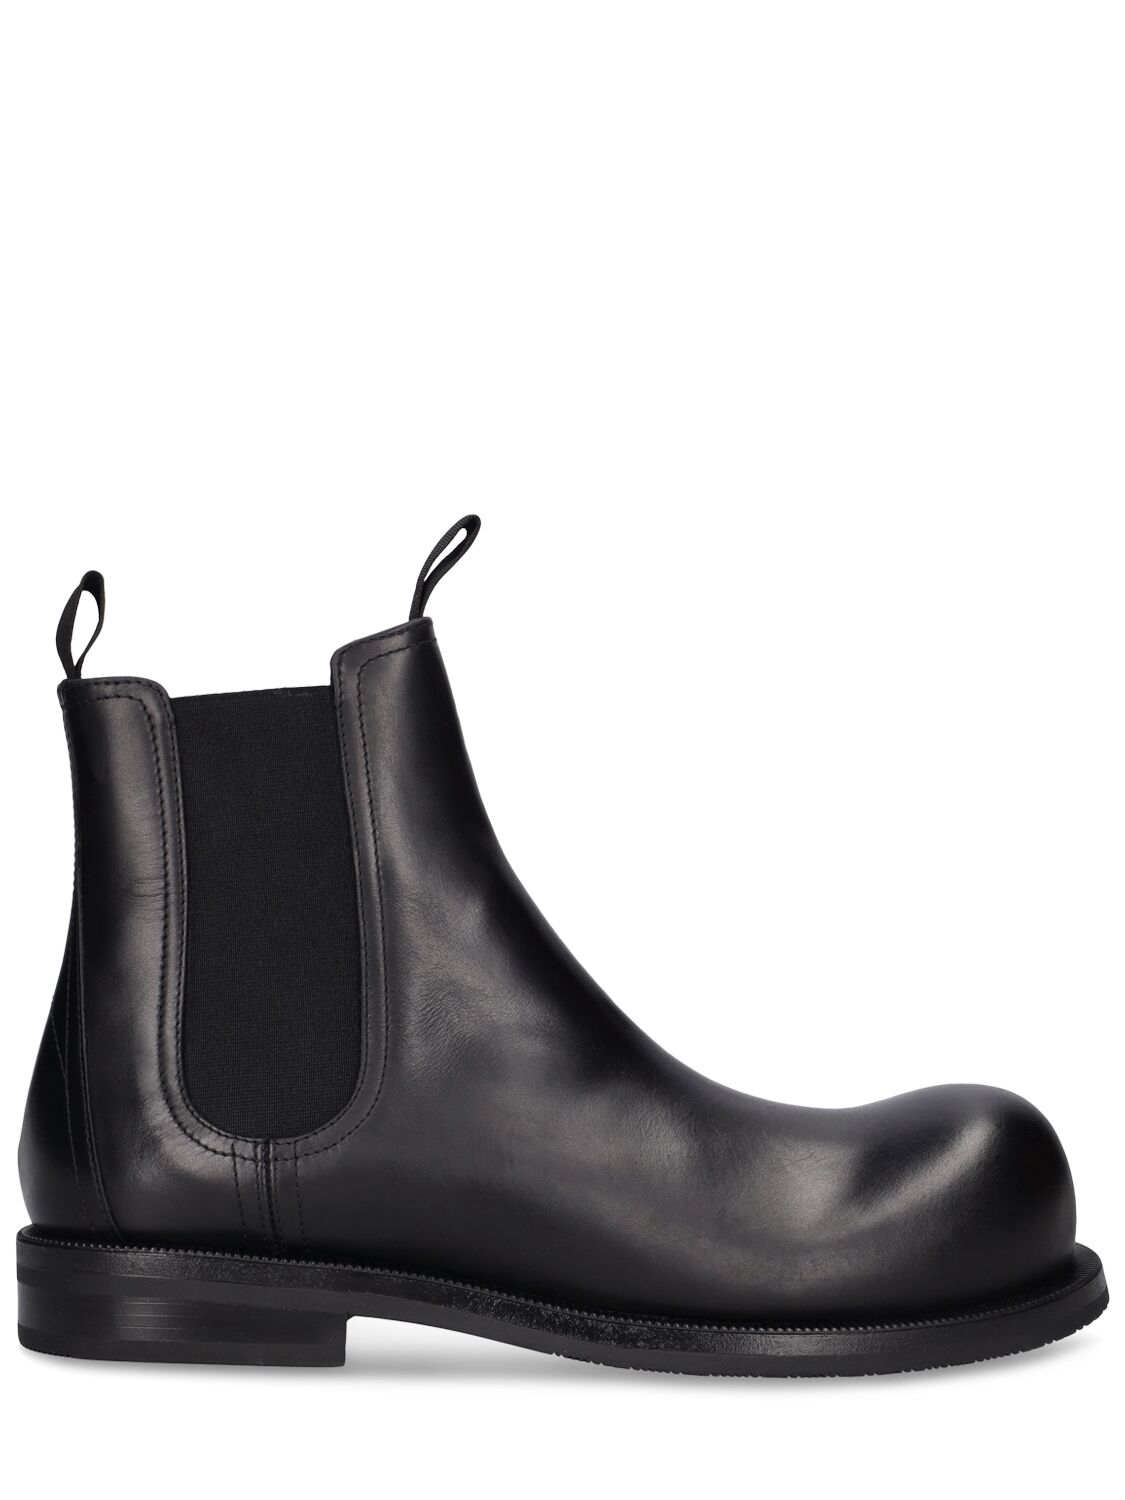 Image of Bulb-toe Leather Chelsea Boots